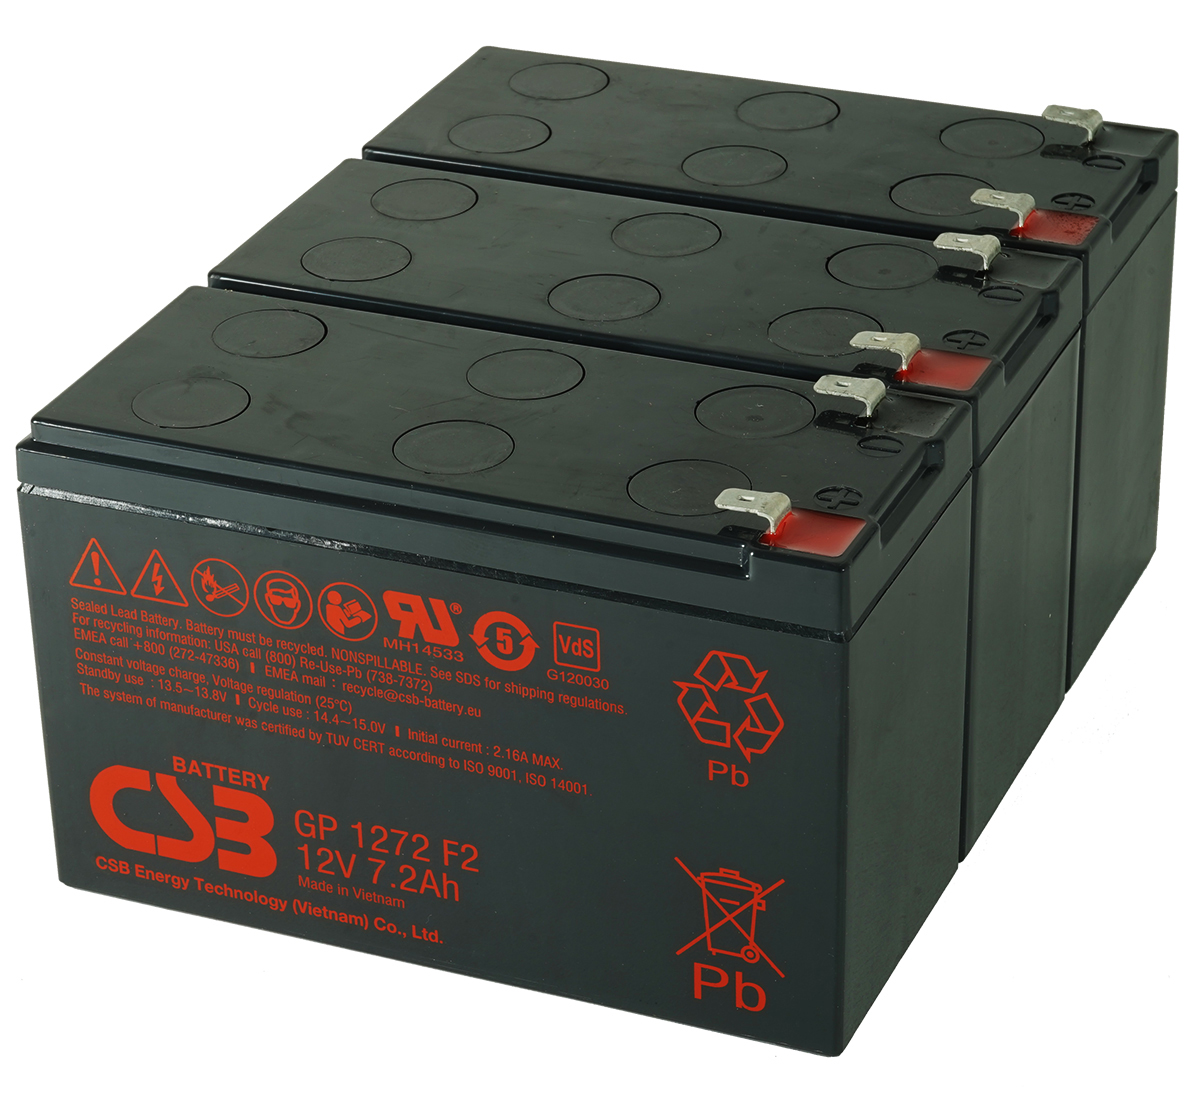 MDS1009 UPS Battery Kit for MGE AB1009